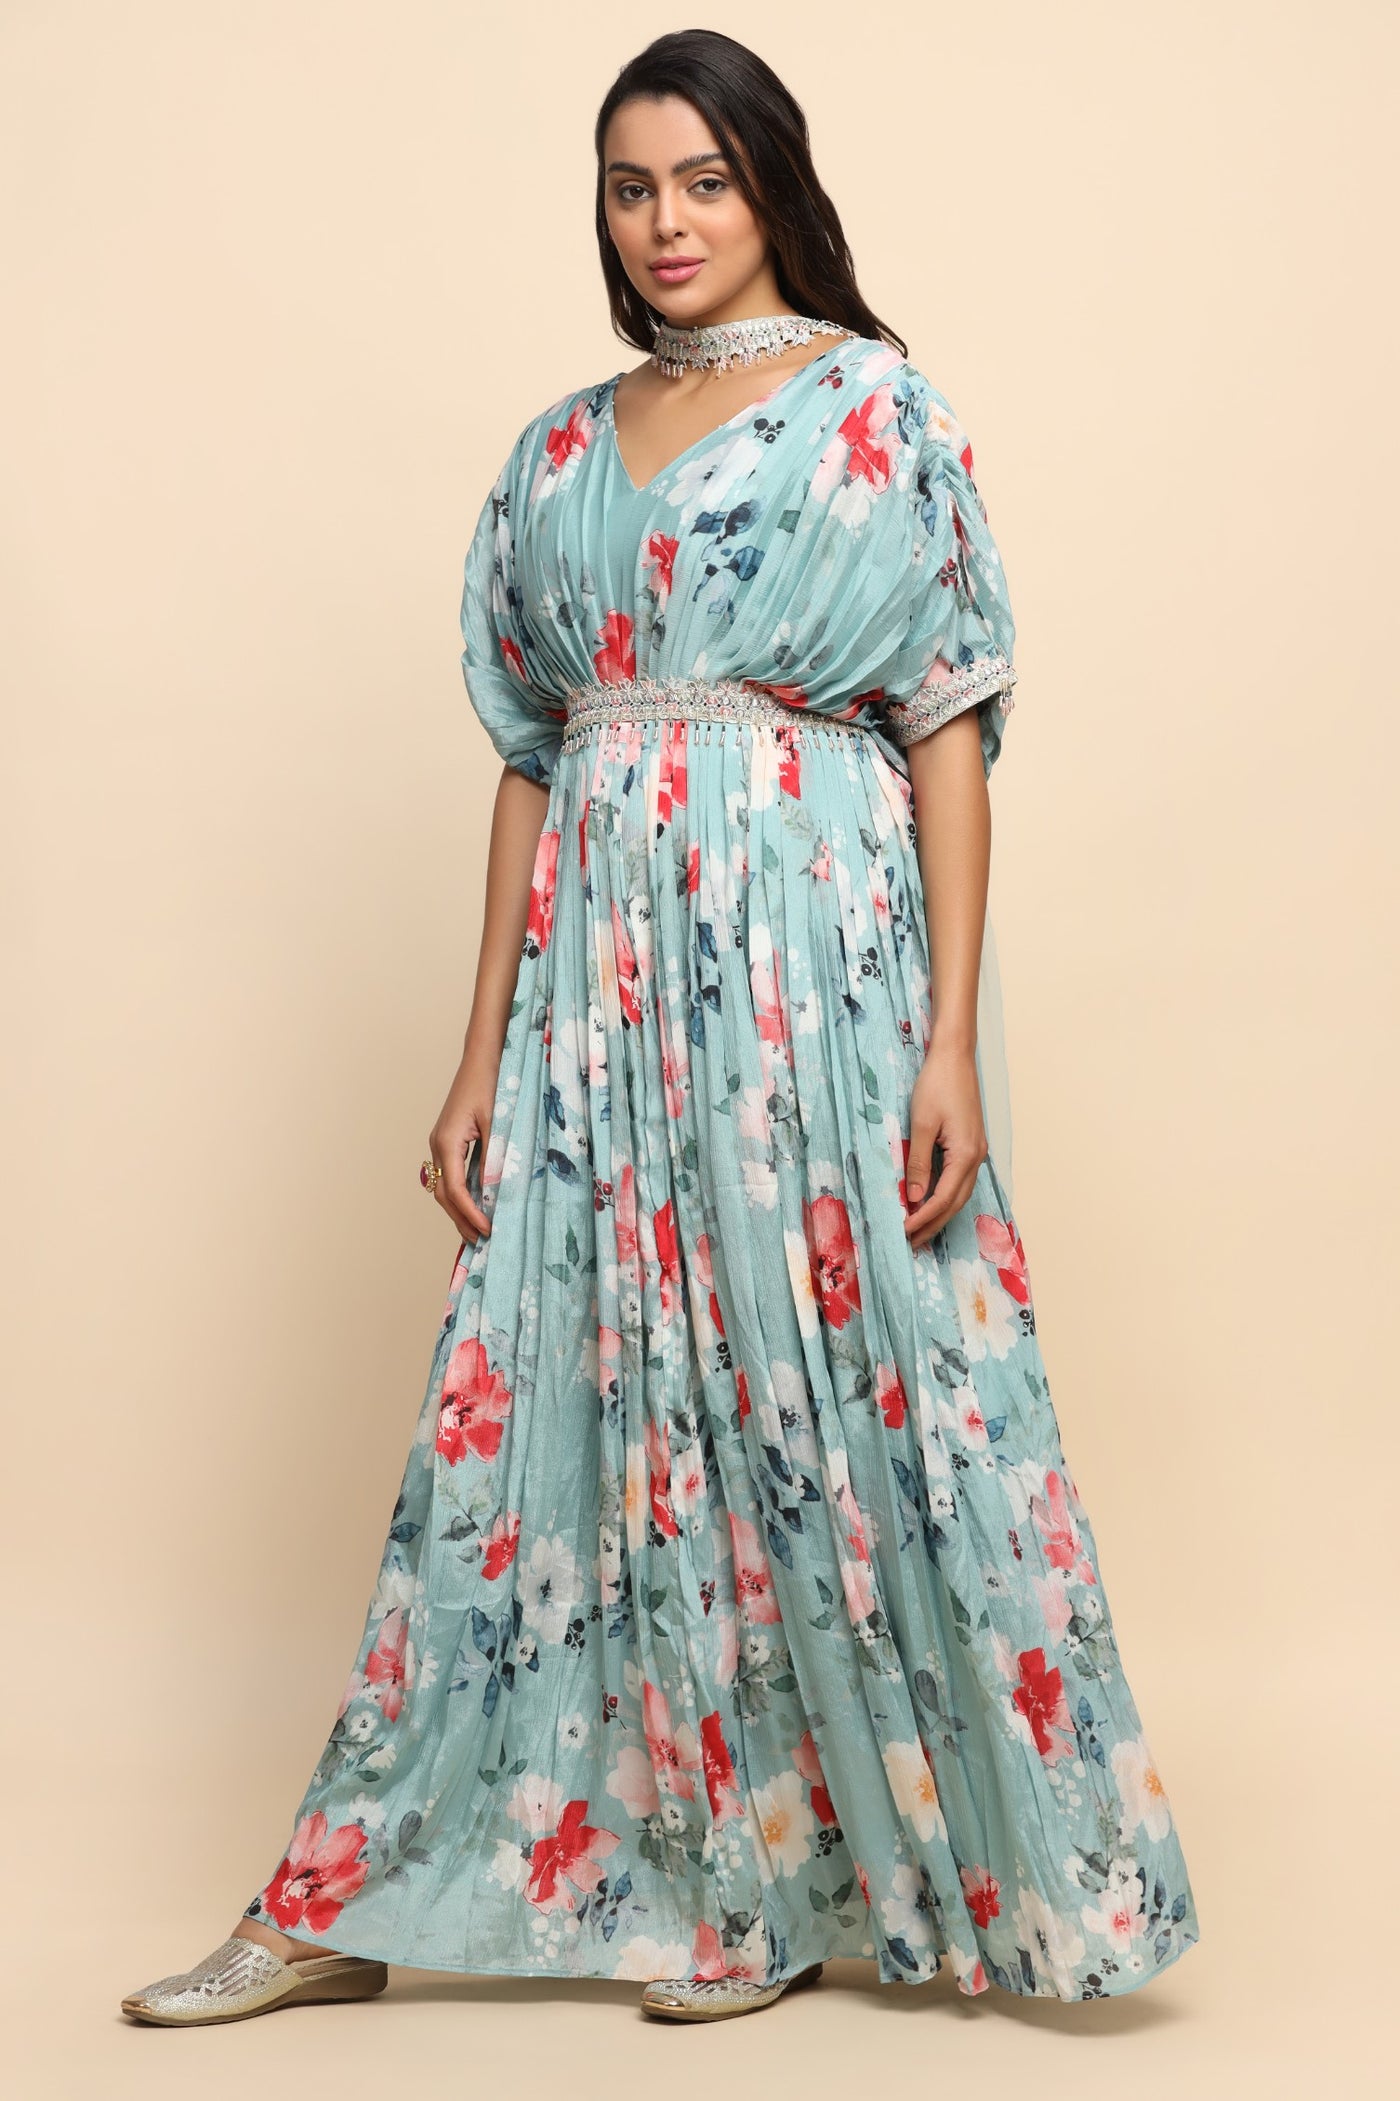 Beautiful blue color floral printed dress